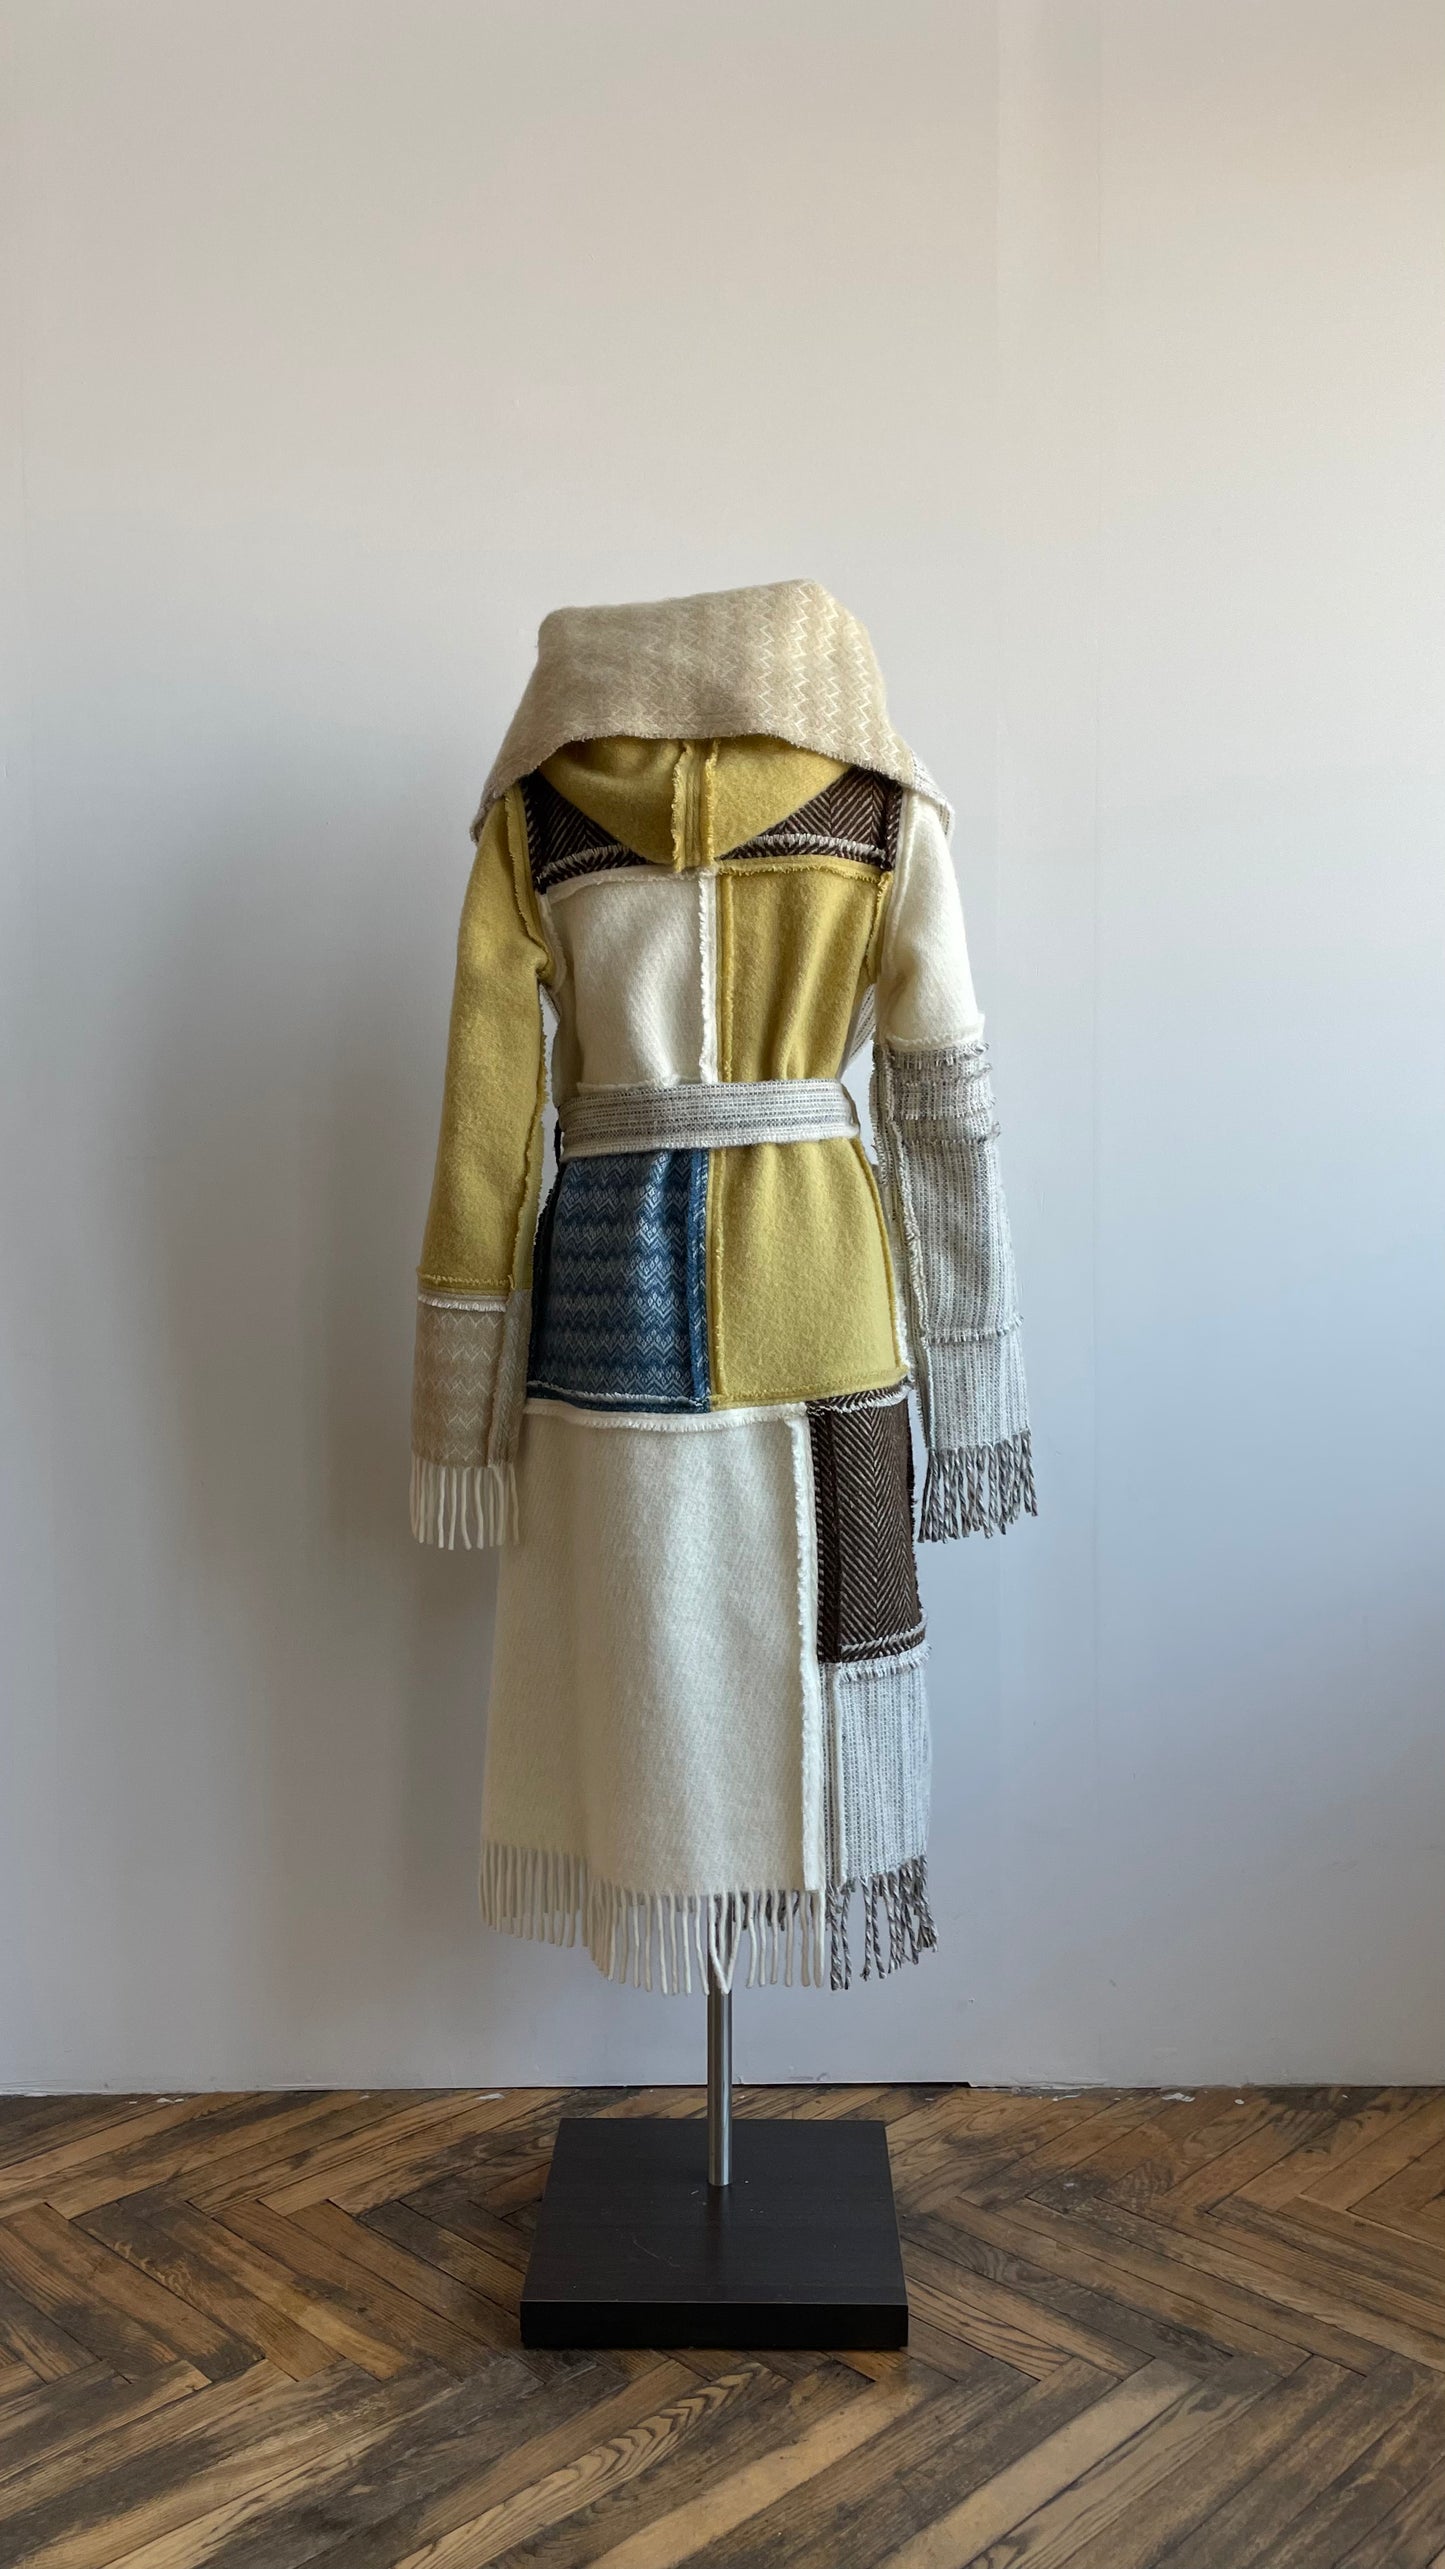 LIEPA Wool maxi coat (Size XS/S) in light colours with pop of yellow and blue